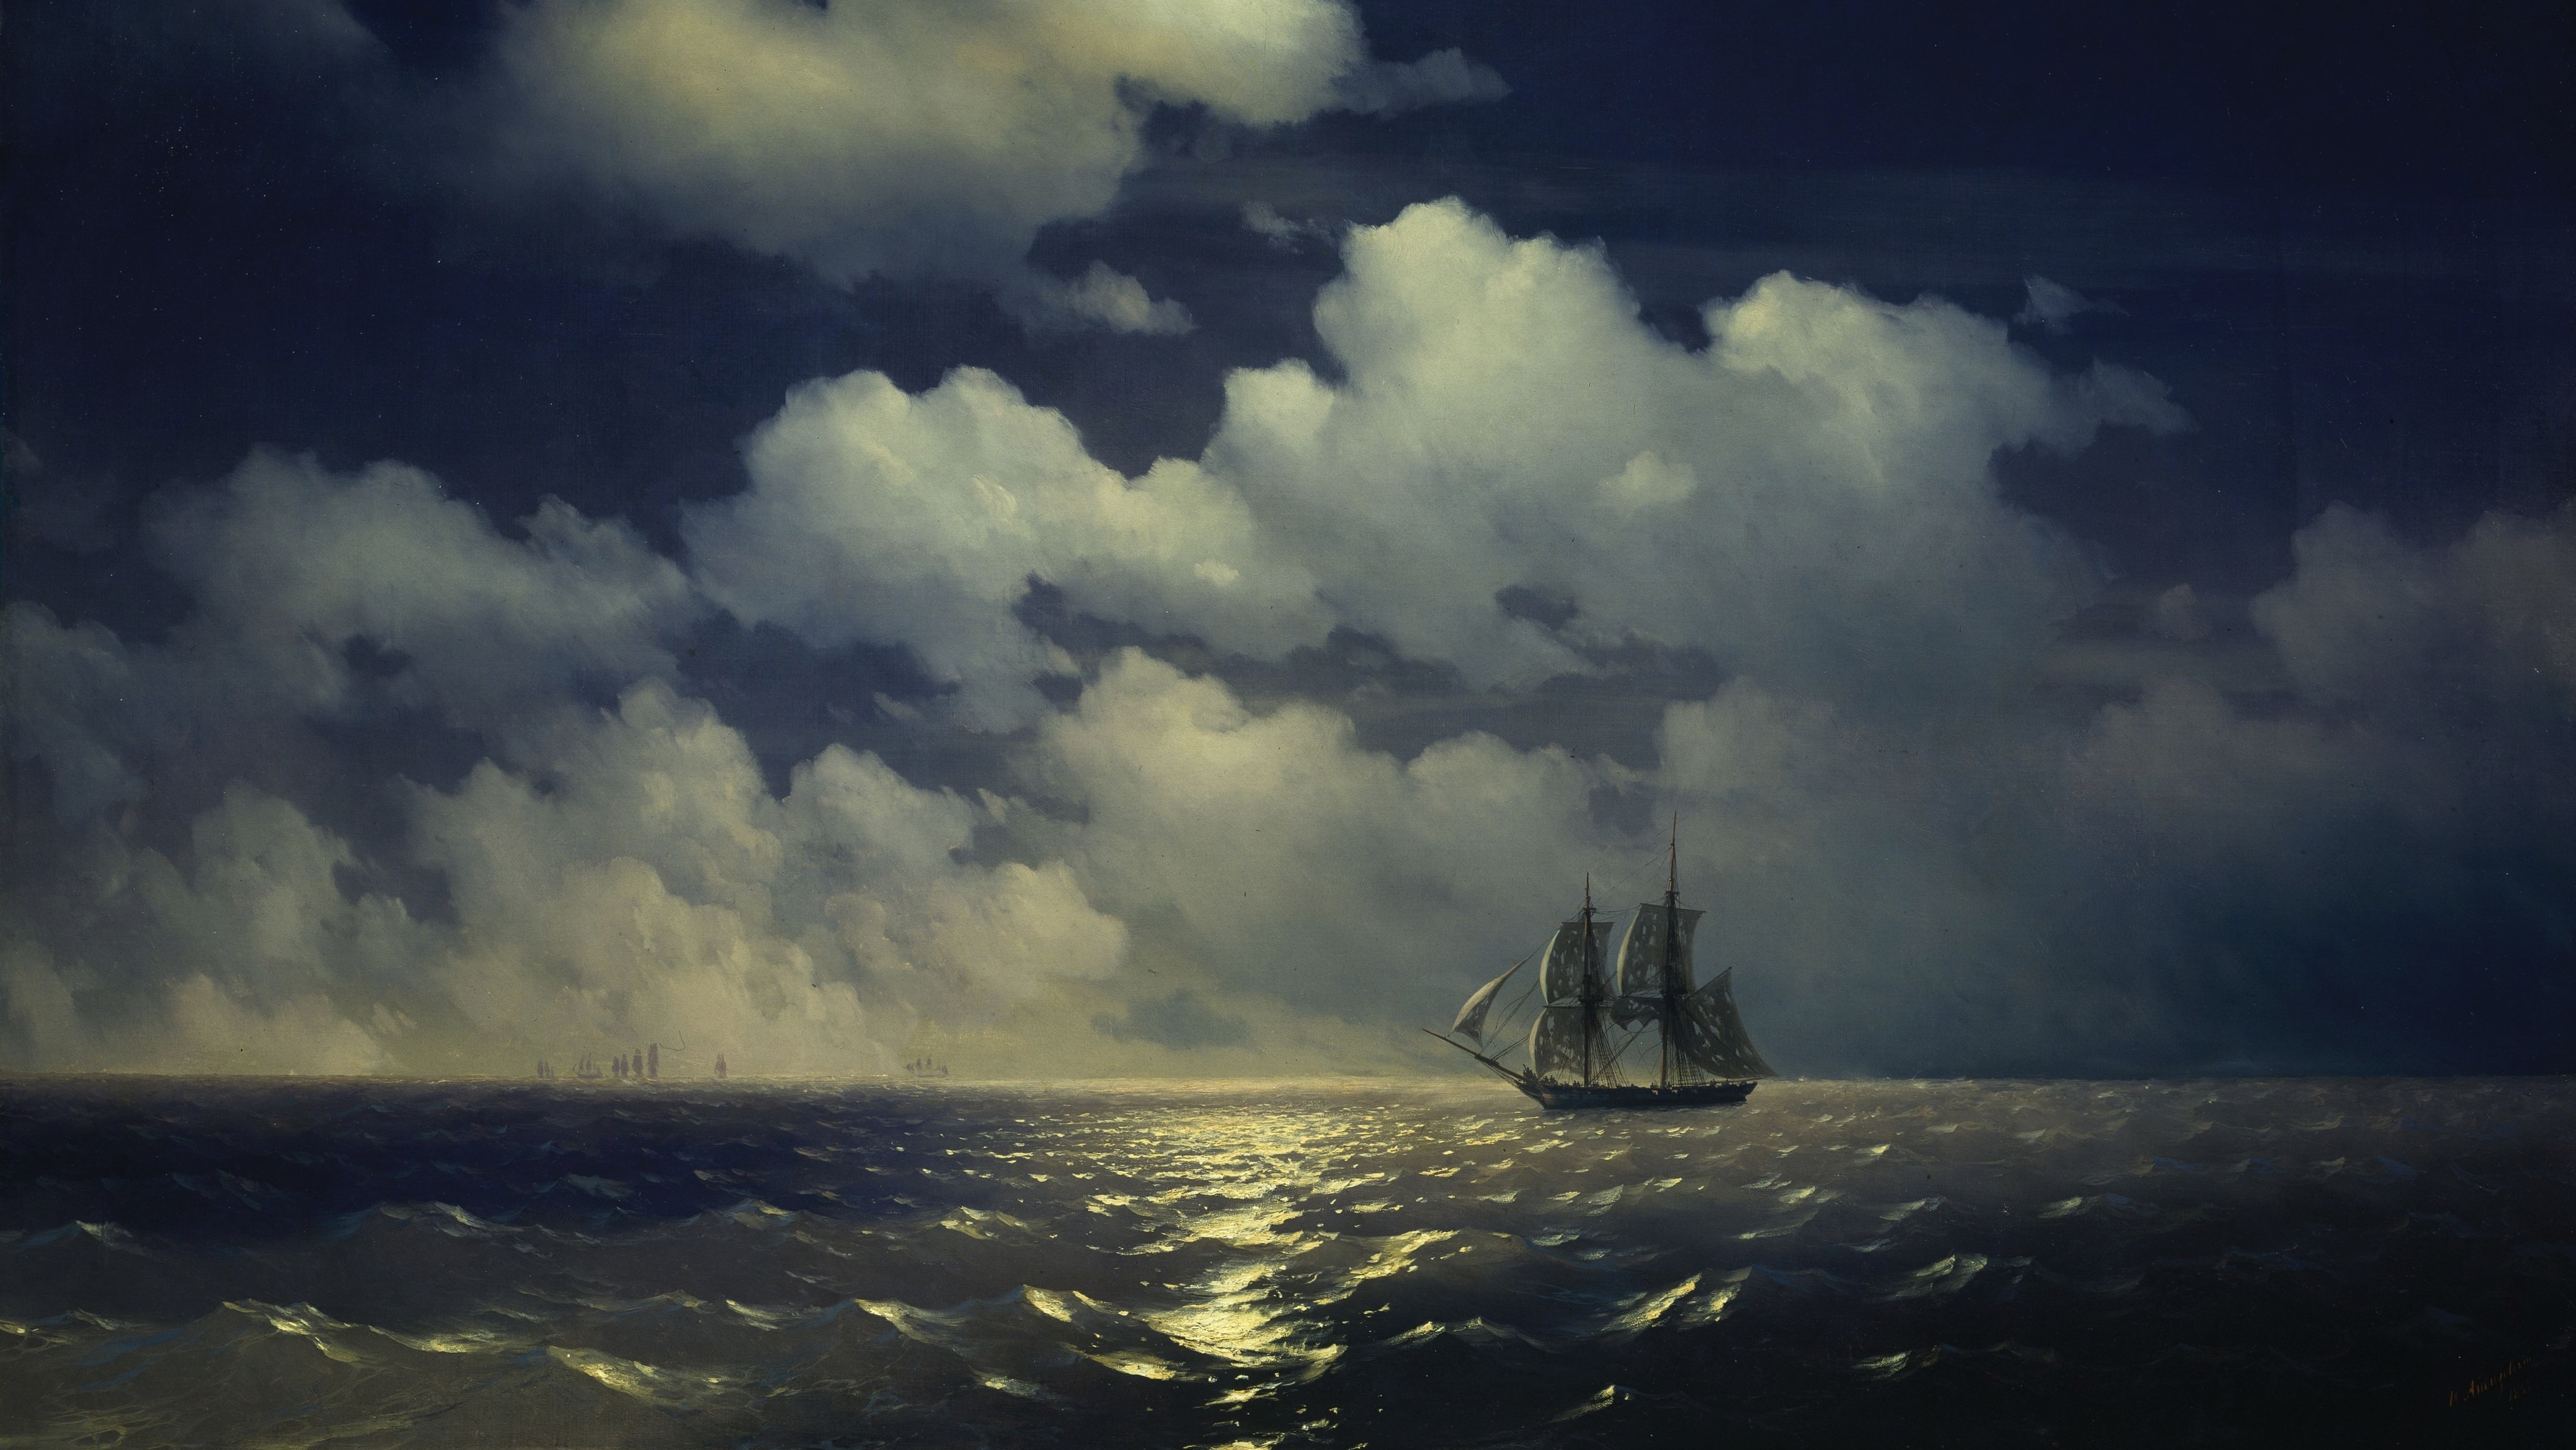 Sailing Ship Ship Ocean View Ivan Aivazovsky Clouds Waves Calm Waters Oil On Canvas Warship Russian  4583x2580